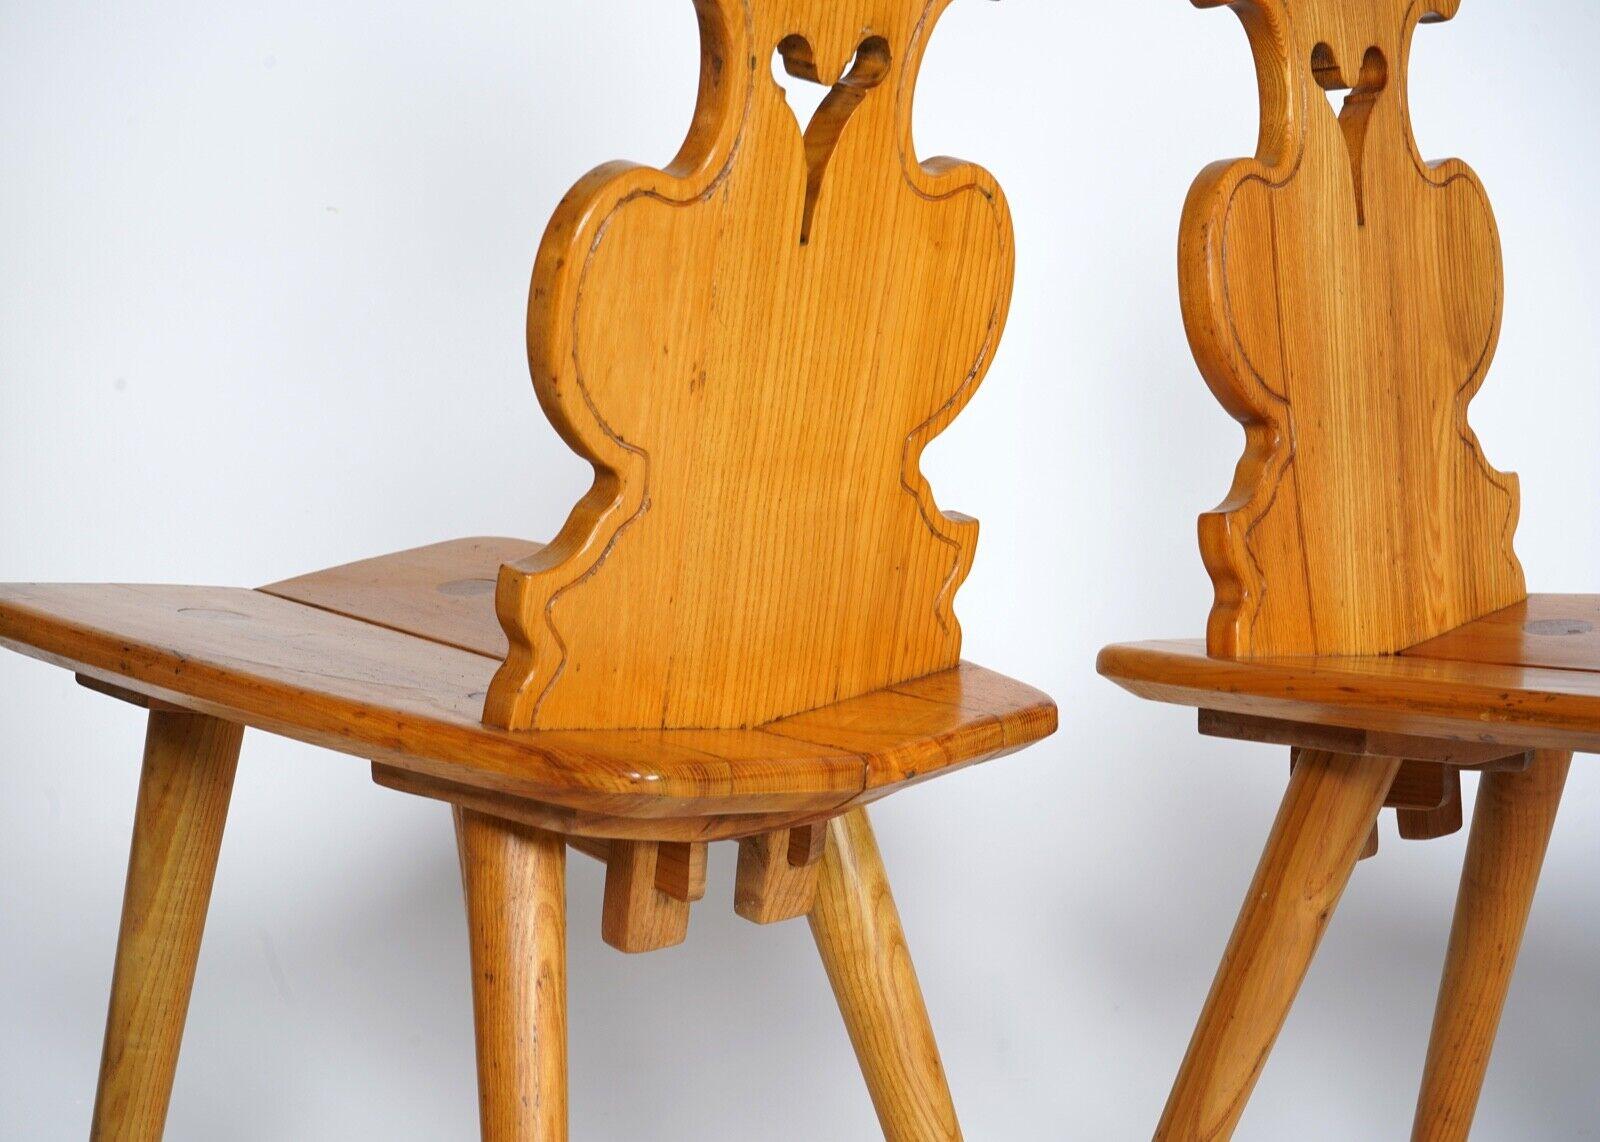 pair of sculptural Polish Capelia chairs in solid pine.
Made in the 1960s.
These chairs have some marks and signs of use but are solid and usable.

In good used condition. As a vintage piece there are signs of wear and small imperfections, which